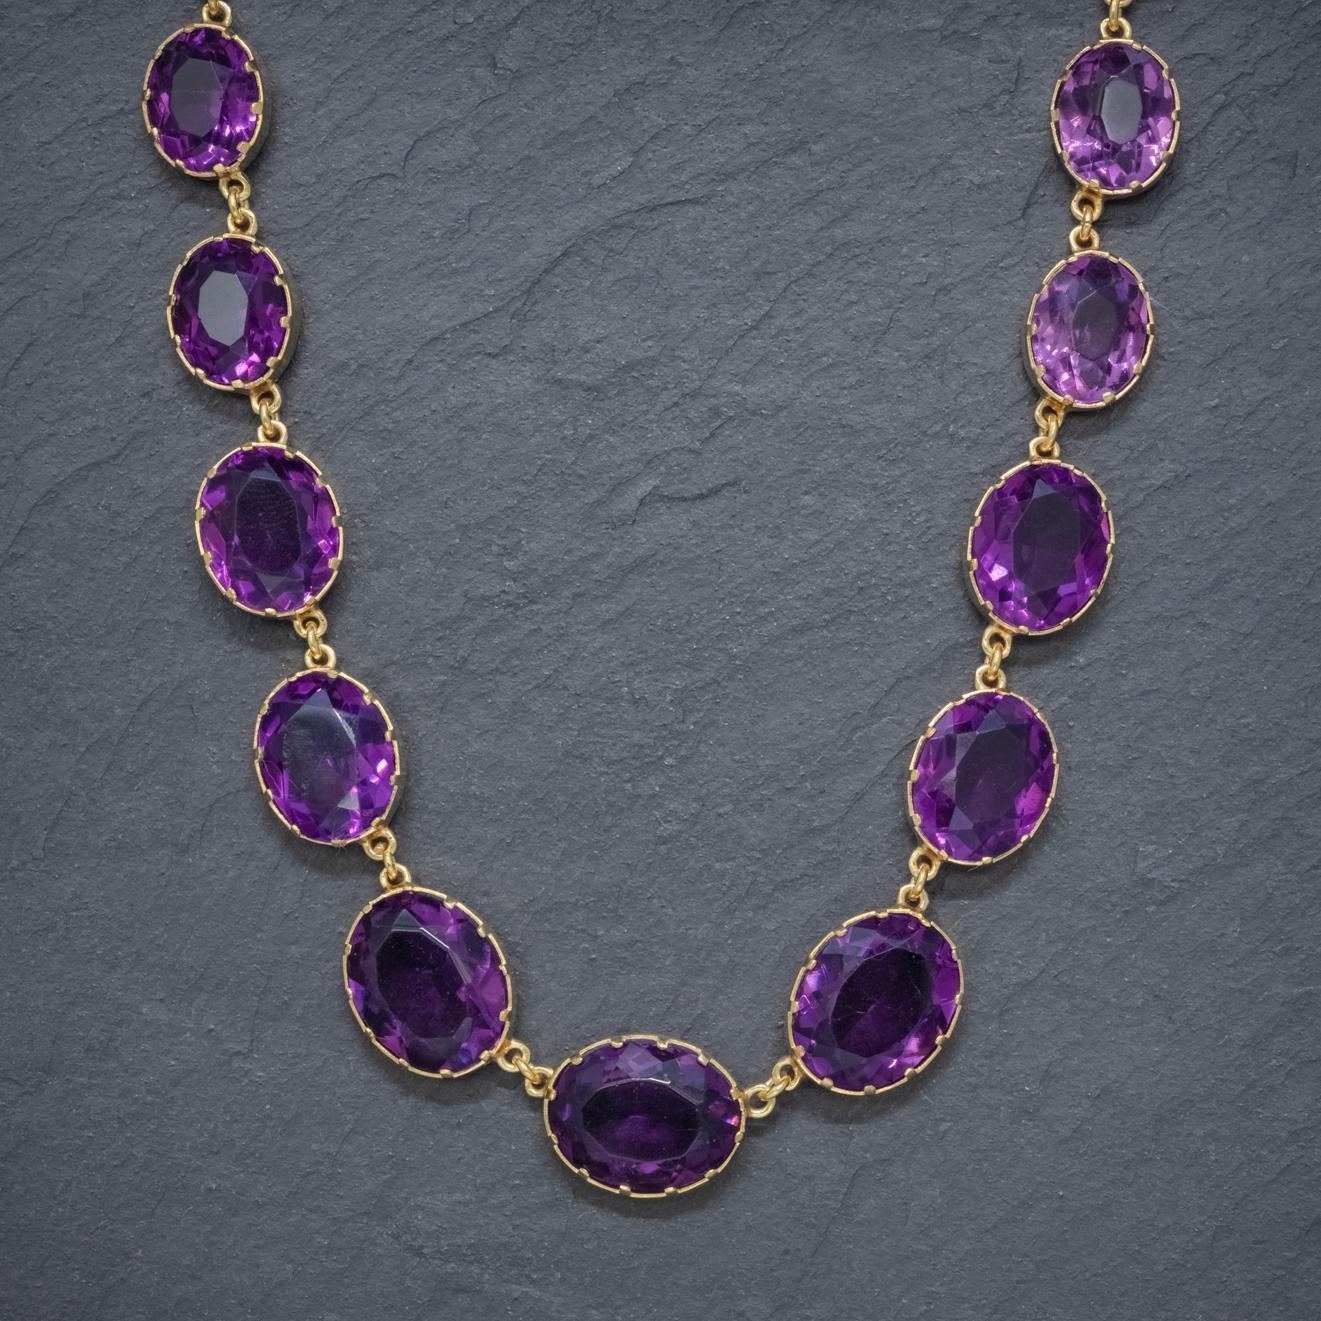 Late Victorian Antique Victorian Violet Paste Necklace 18 Carat Gold on Silver, circa 1900 For Sale